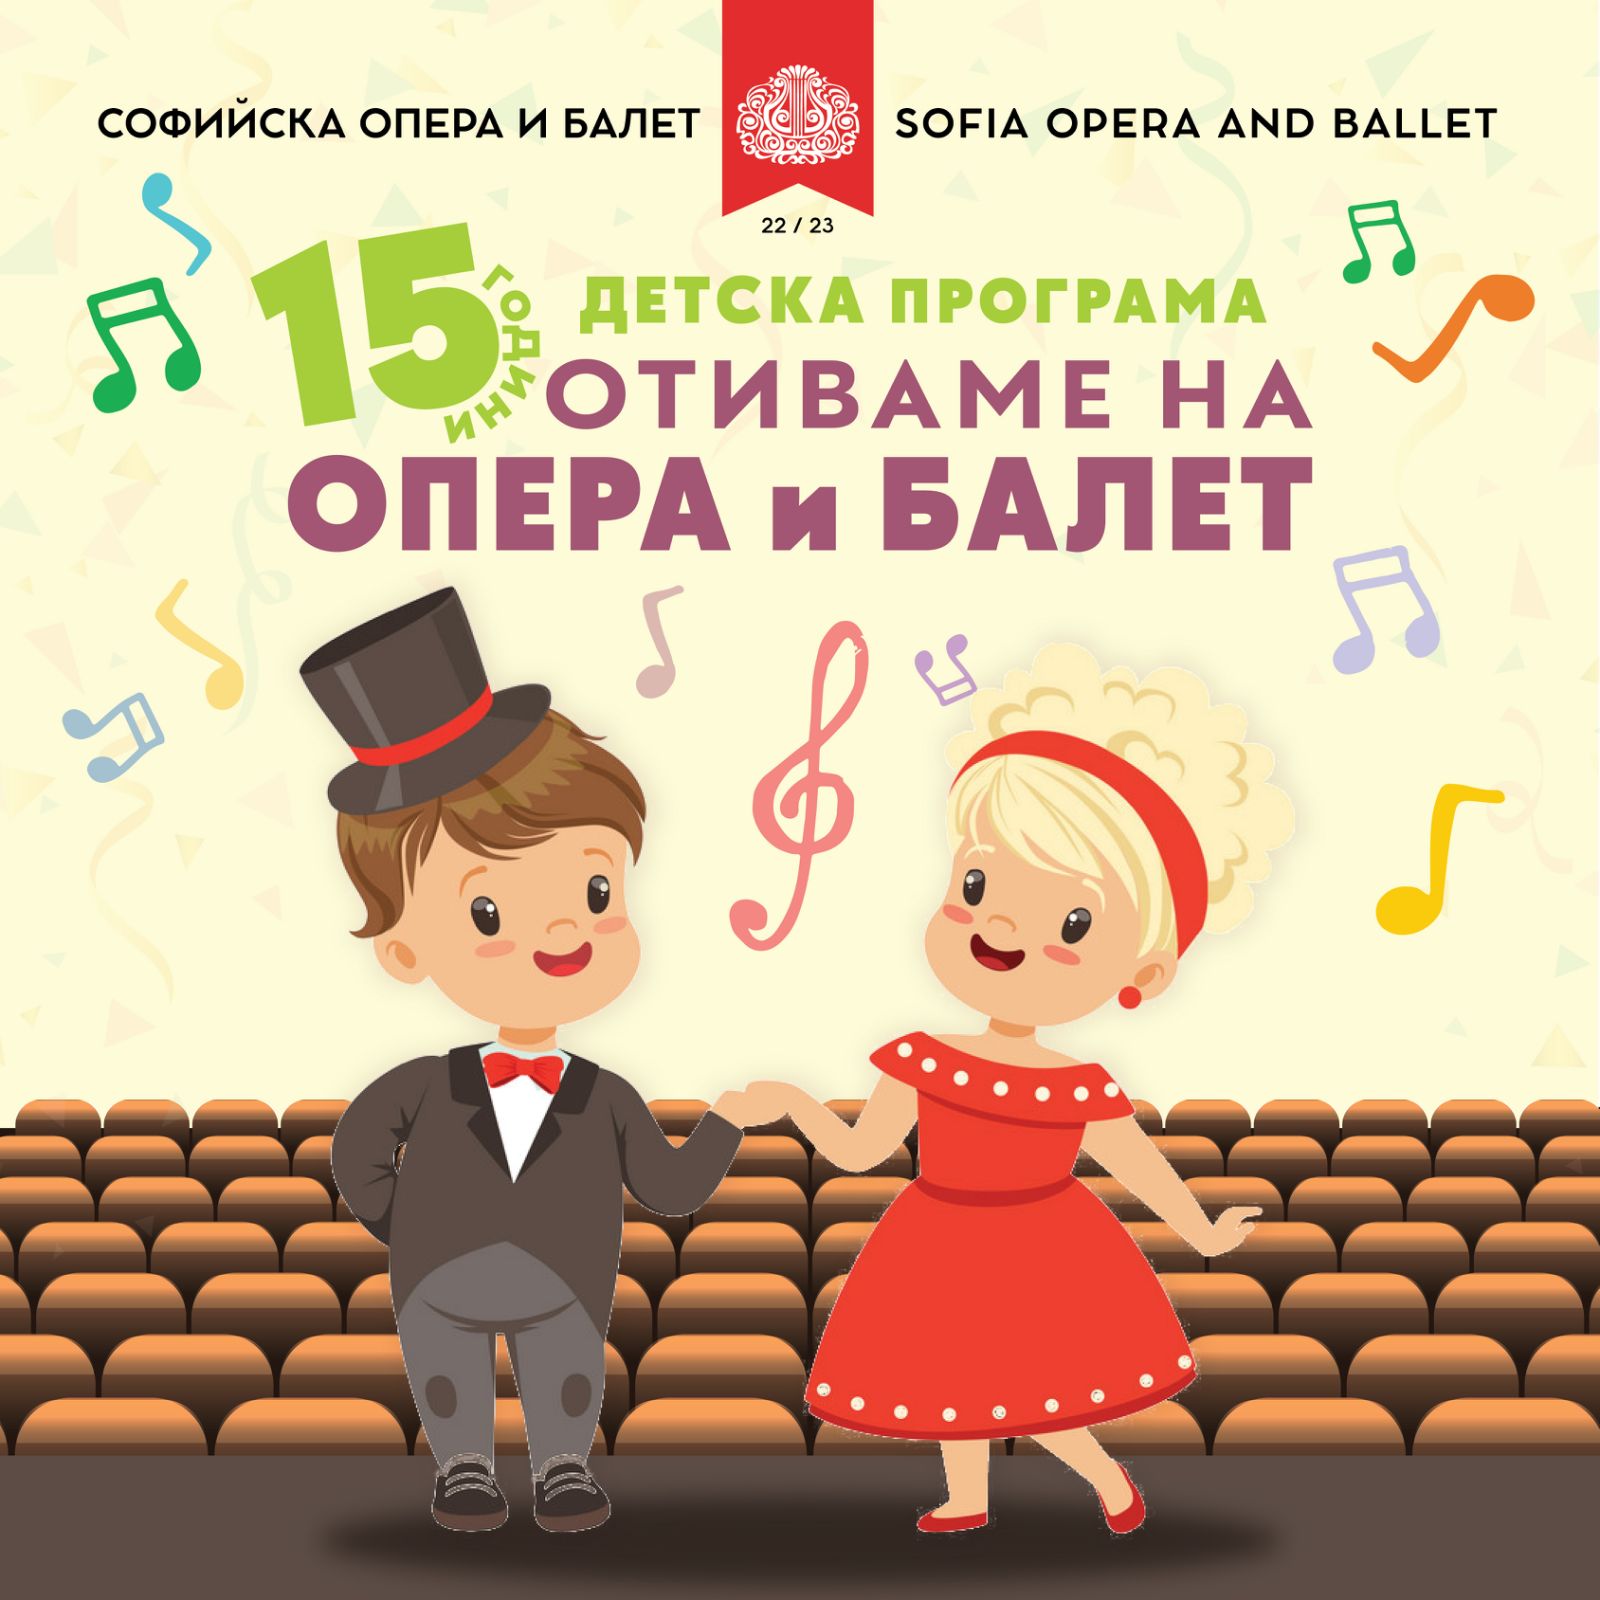 The children's programme "We are going to opera and ballet" 15 years old